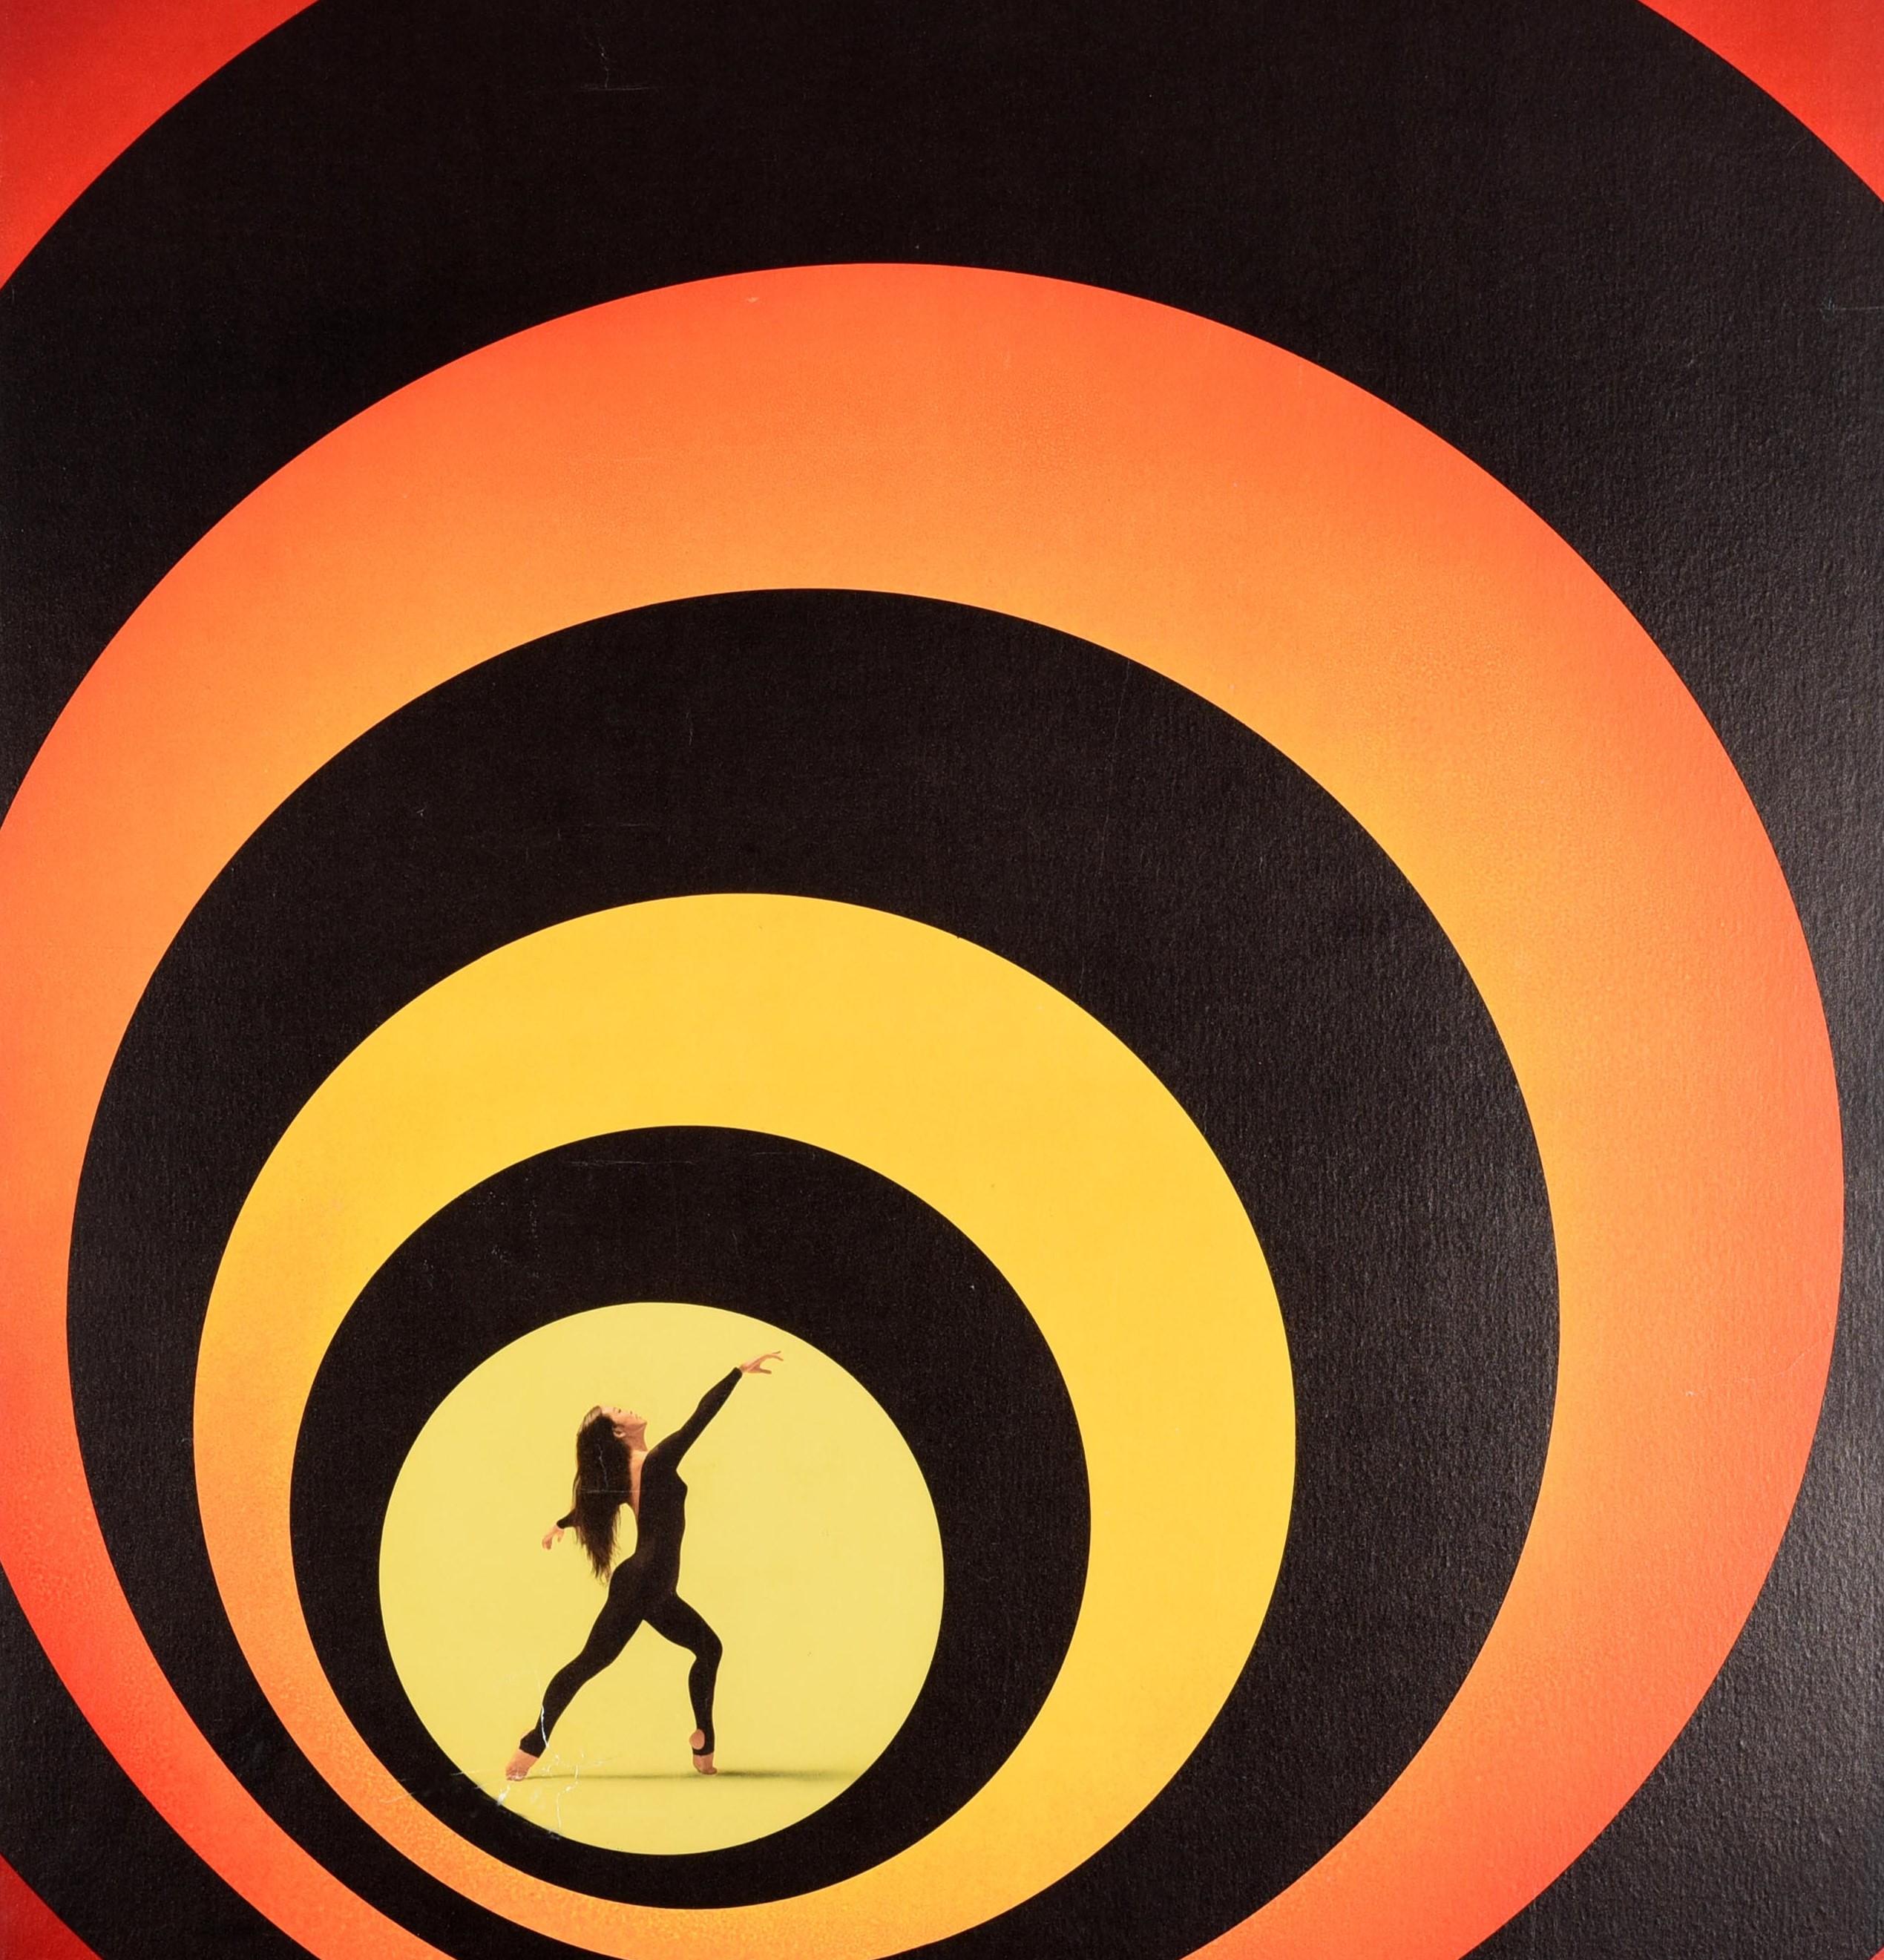 Original vintage travel poster for Japan issued by Pan Am featuring a great graphic design showing a lady dancing in the centre of a James Bond style target formed by black circles against a yellow, orange and red shaded background with the stylised